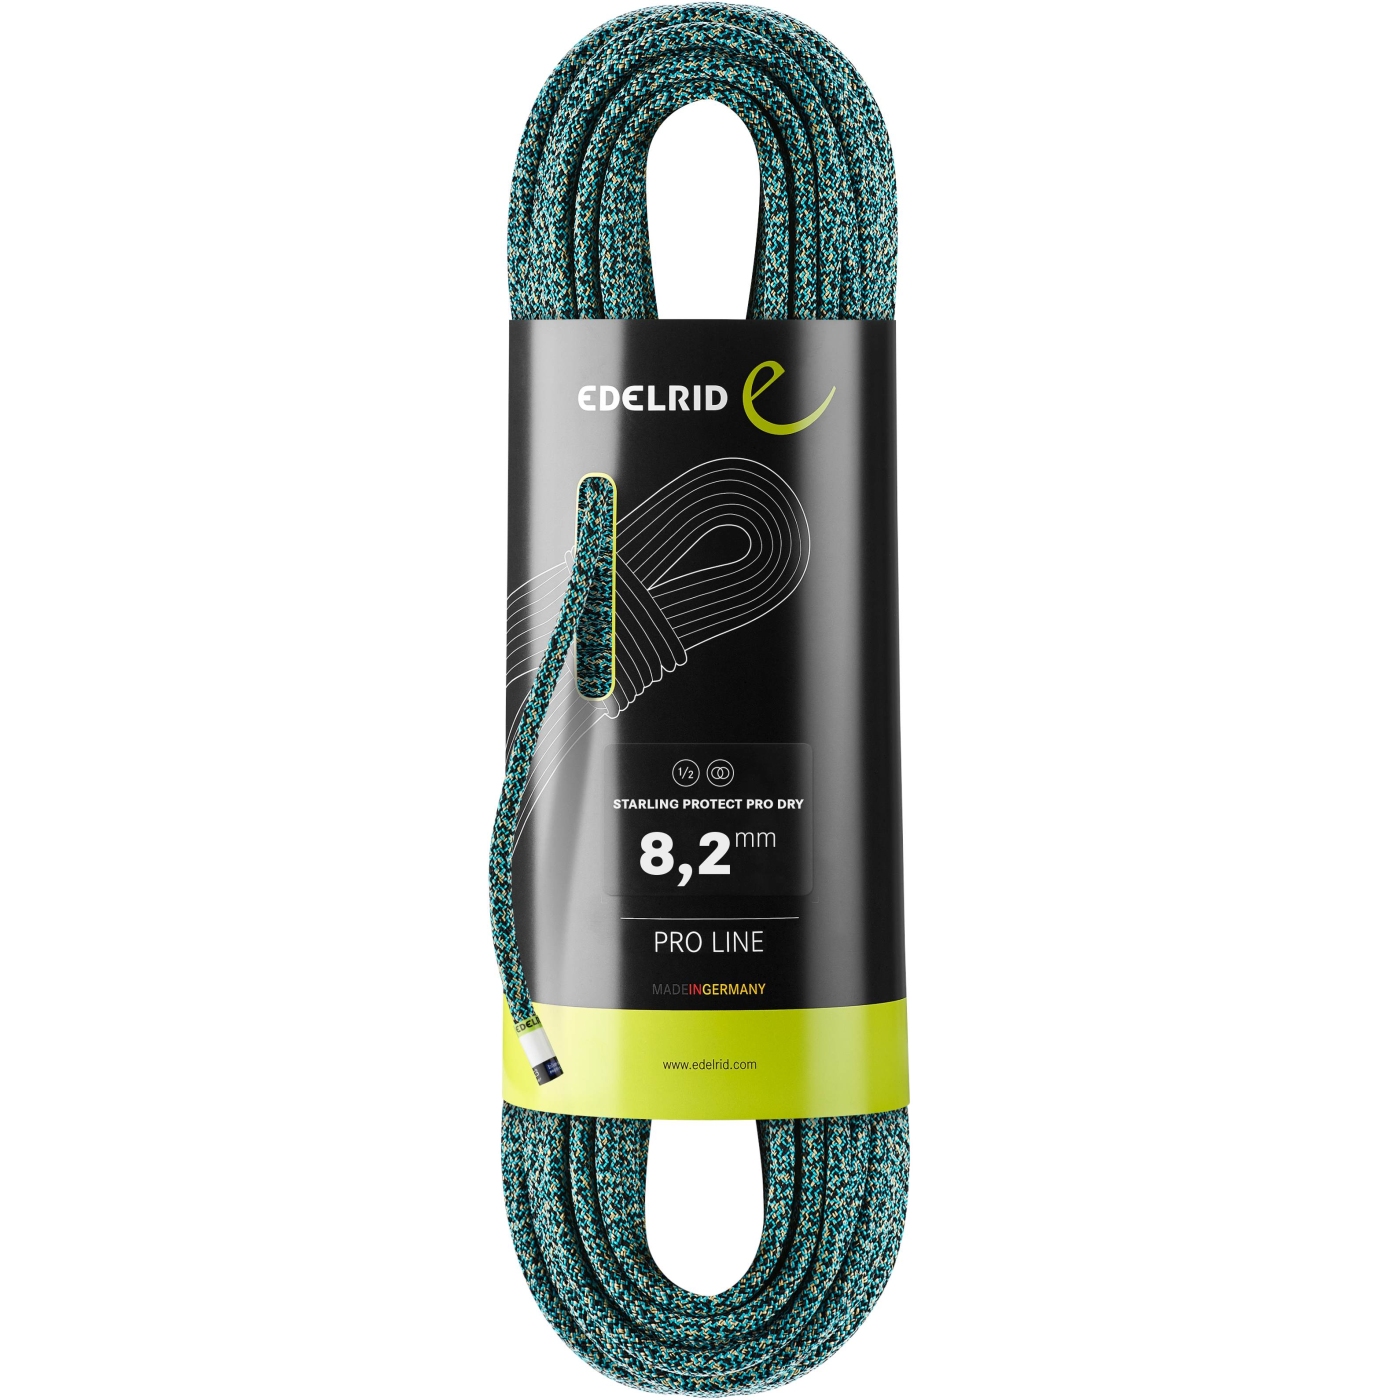 Image of Edelrid Starling Protect Pro Dry 8,2mm Rope - 60m - icemint-night